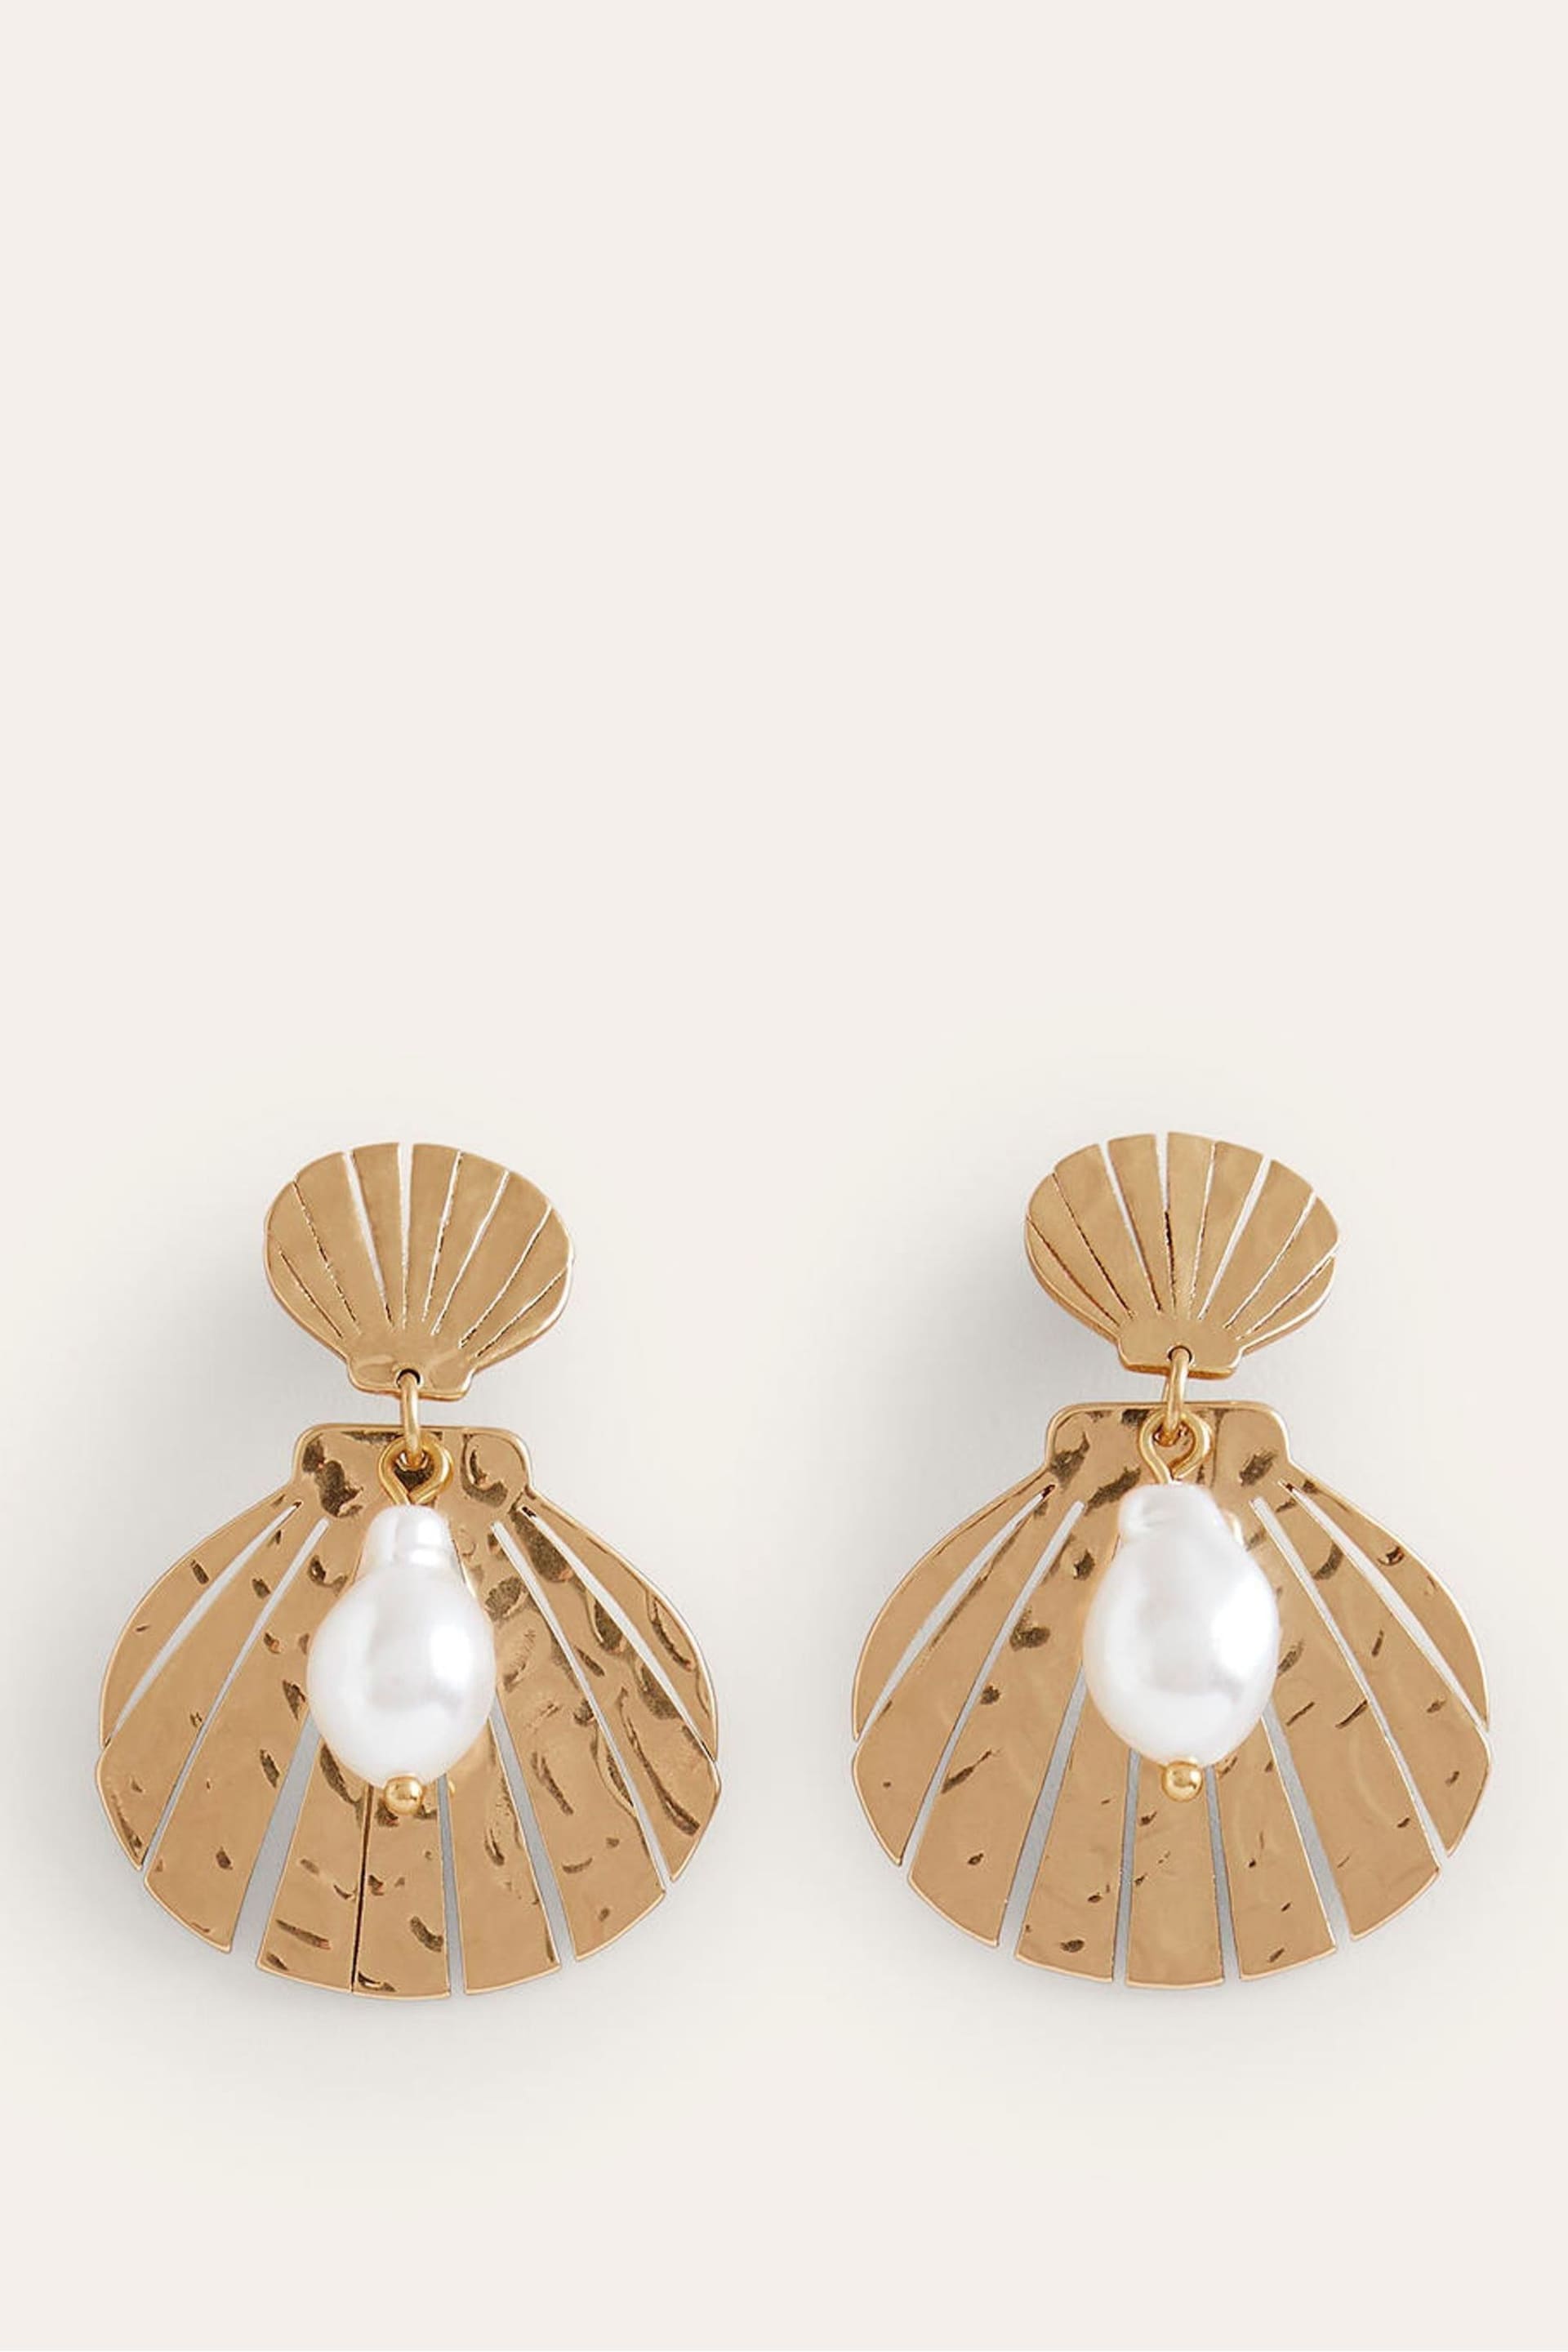 Boden Gold Tone Shell Metal Cut-Out Earrings - Image 1 of 2